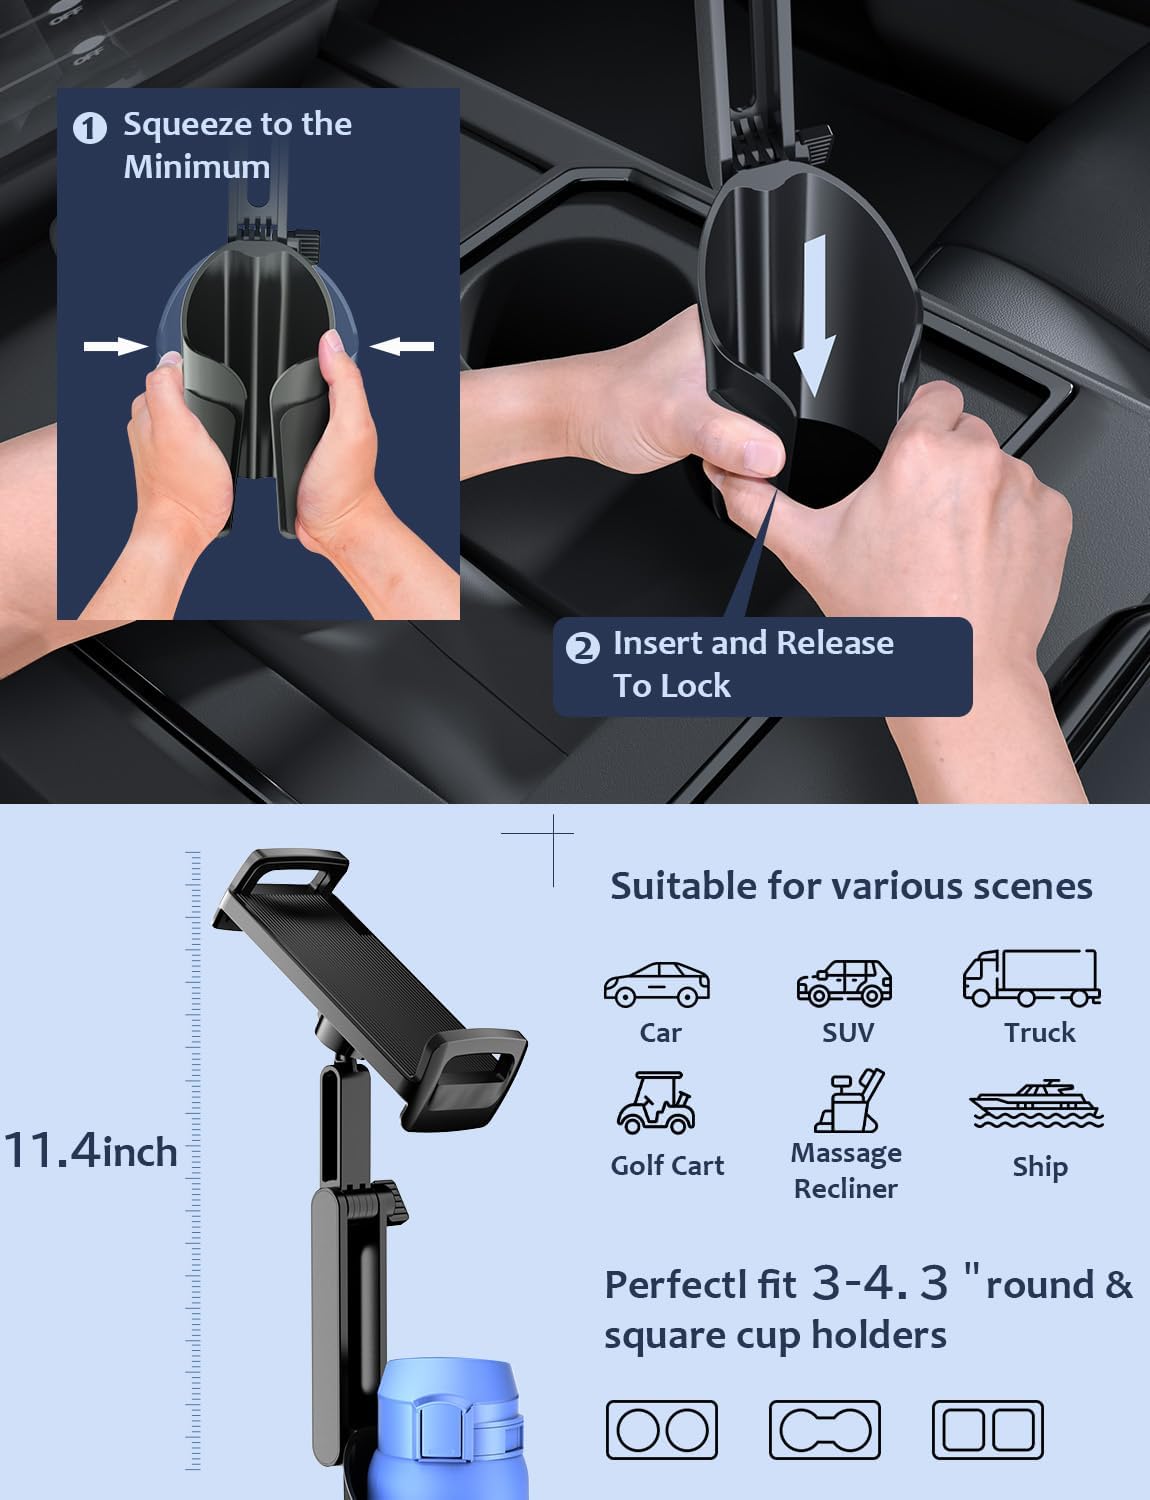 Cup Holder Tablet Mount for iPad: Car Cup Holder Tablet Stand with Adjustable Arm for Truck Compatible with iPad Pro Air Mini | Galaxy Tab | Kindle Fire HD or Other 4.7-12.9 Devices